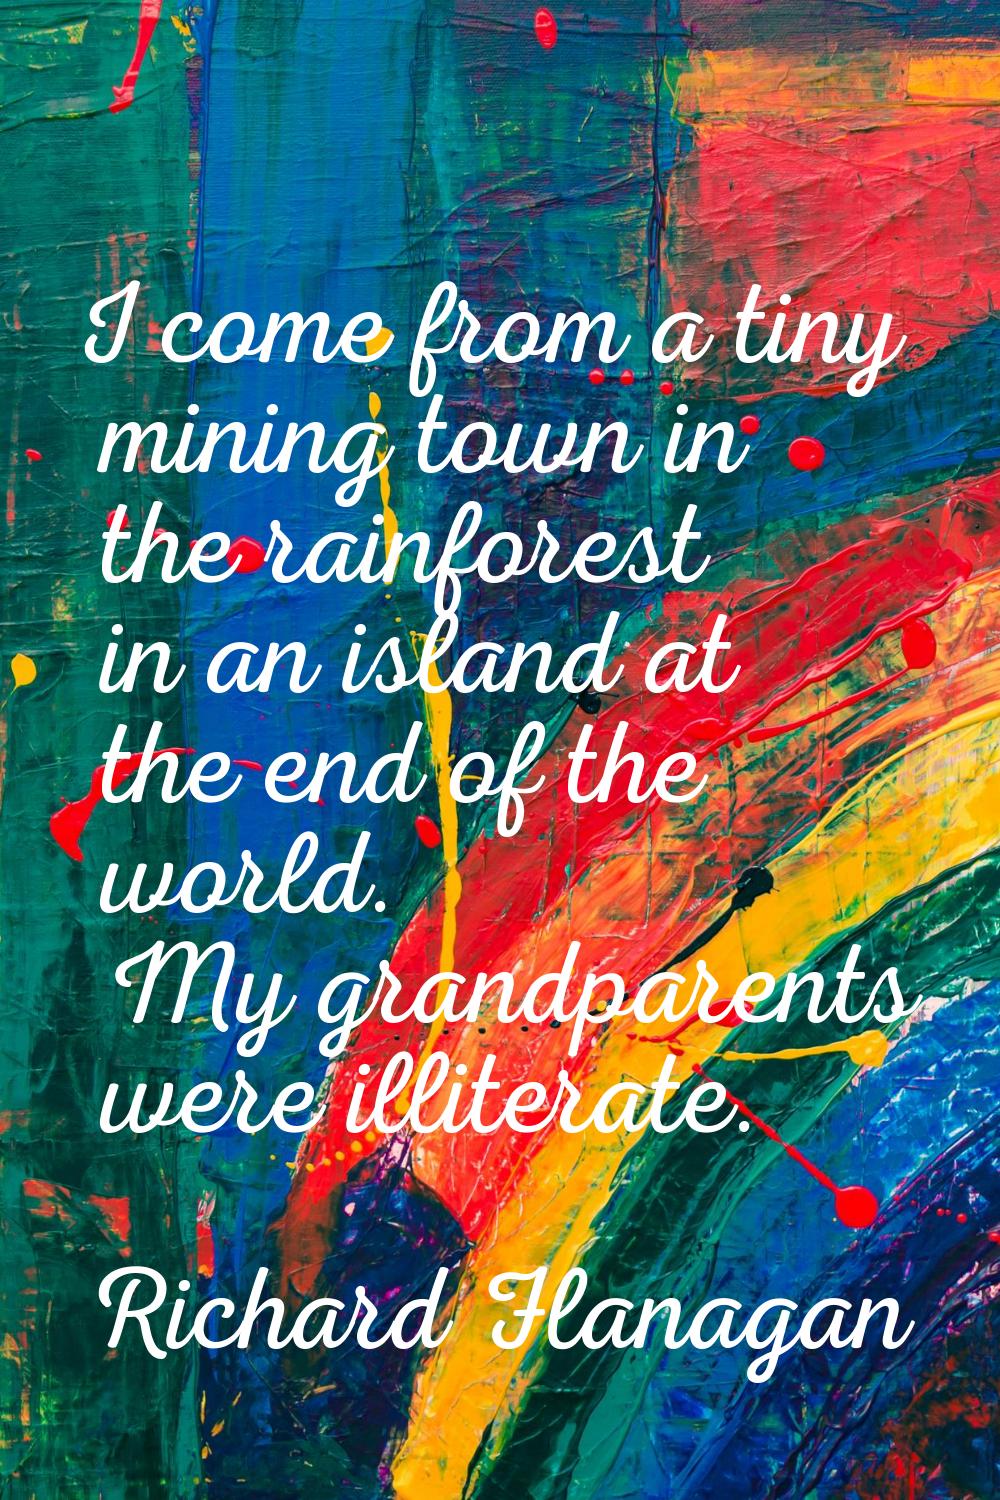 I come from a tiny mining town in the rainforest in an island at the end of the world. My grandpare